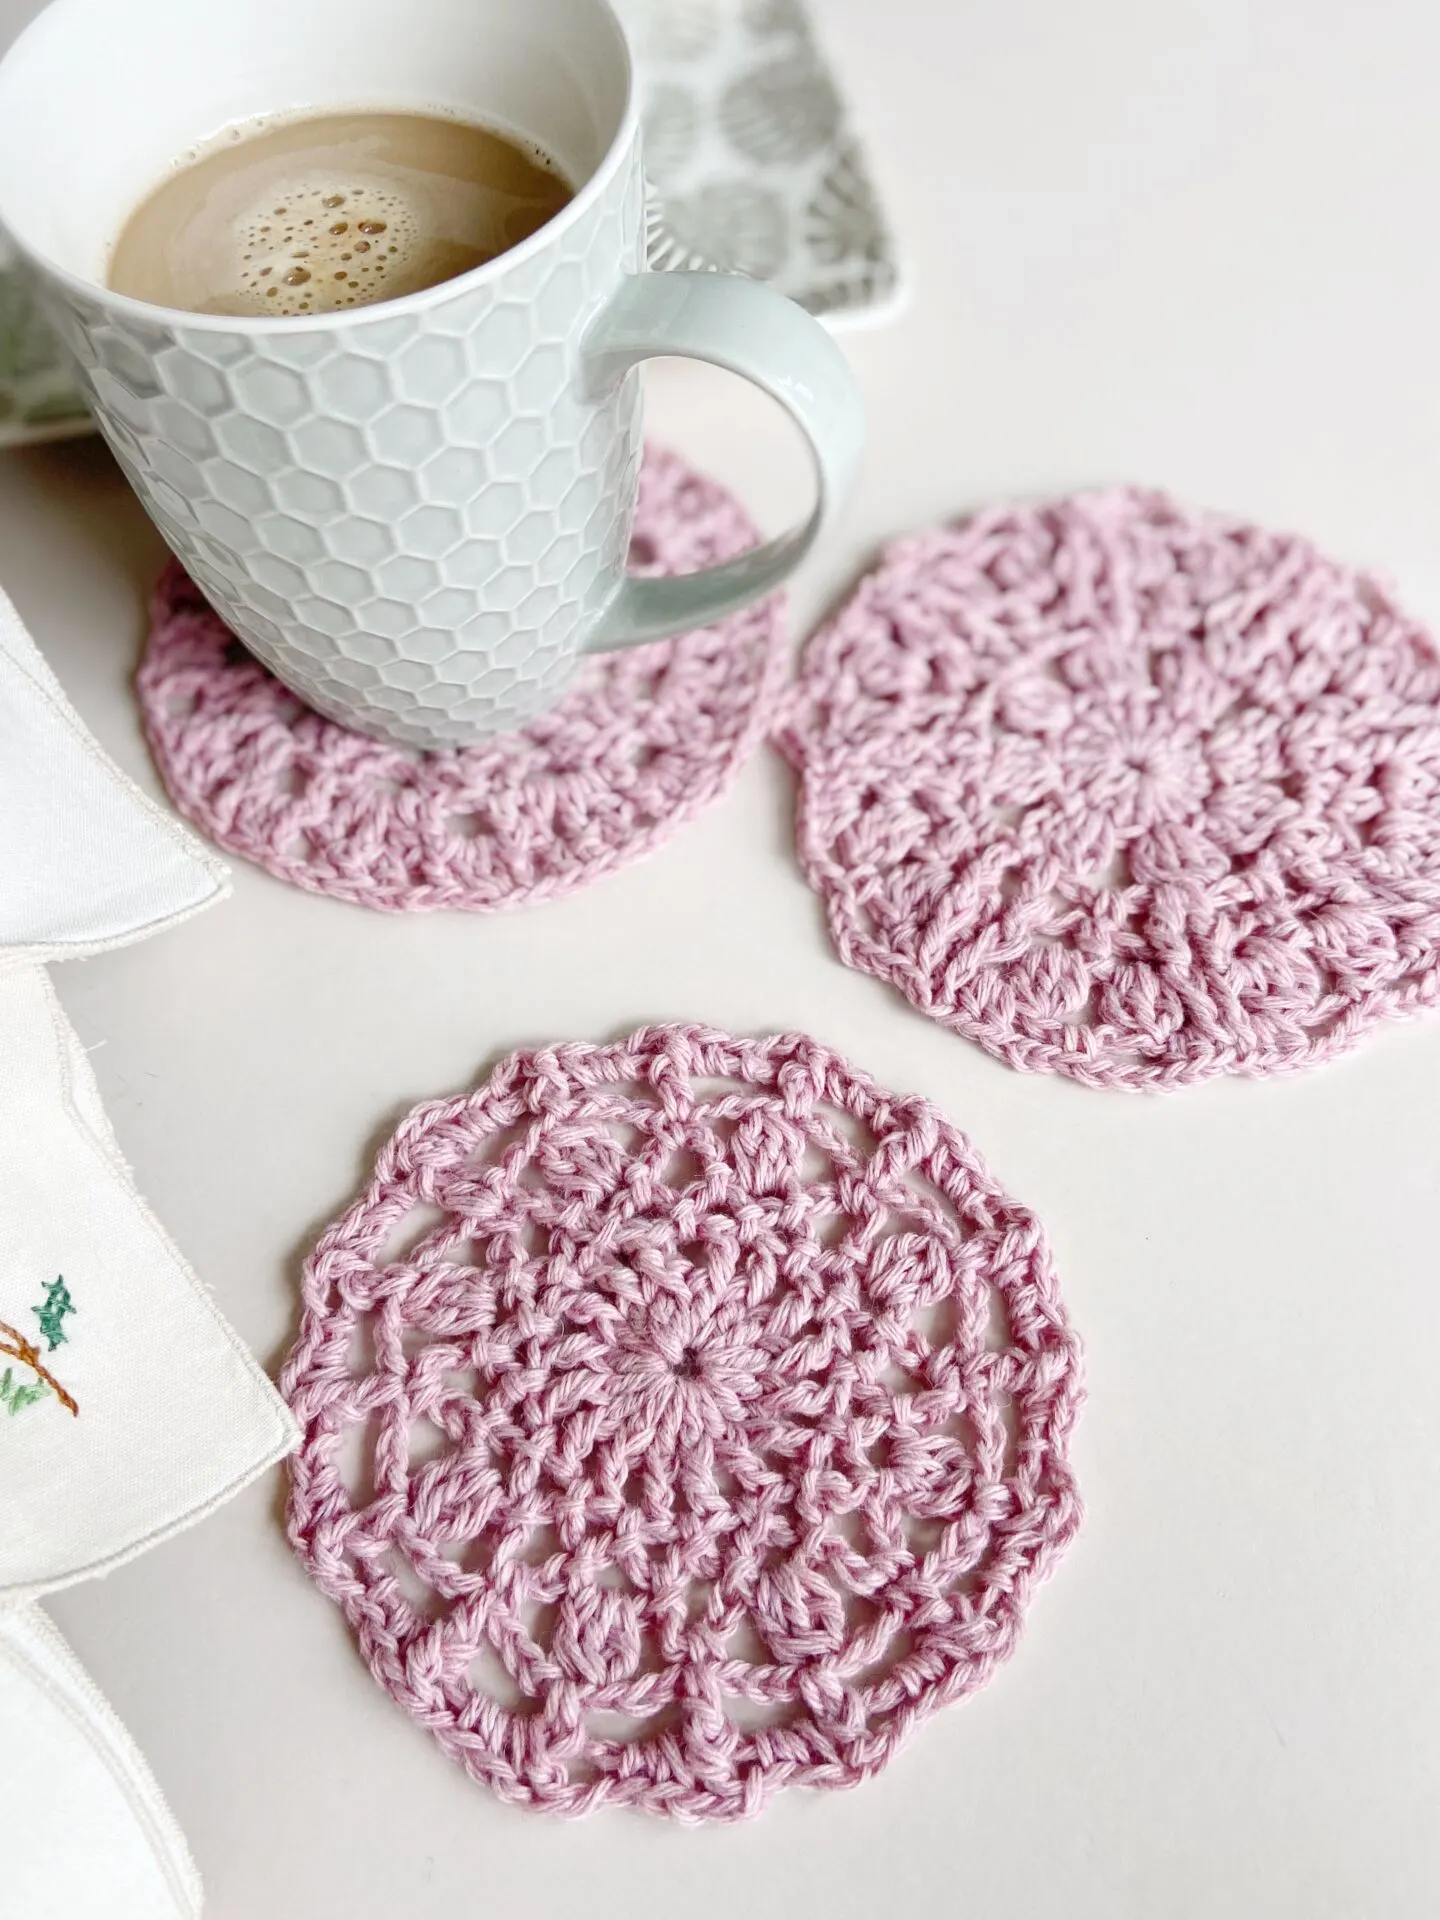 Lace crochet coaster pattern on table with tea cup.